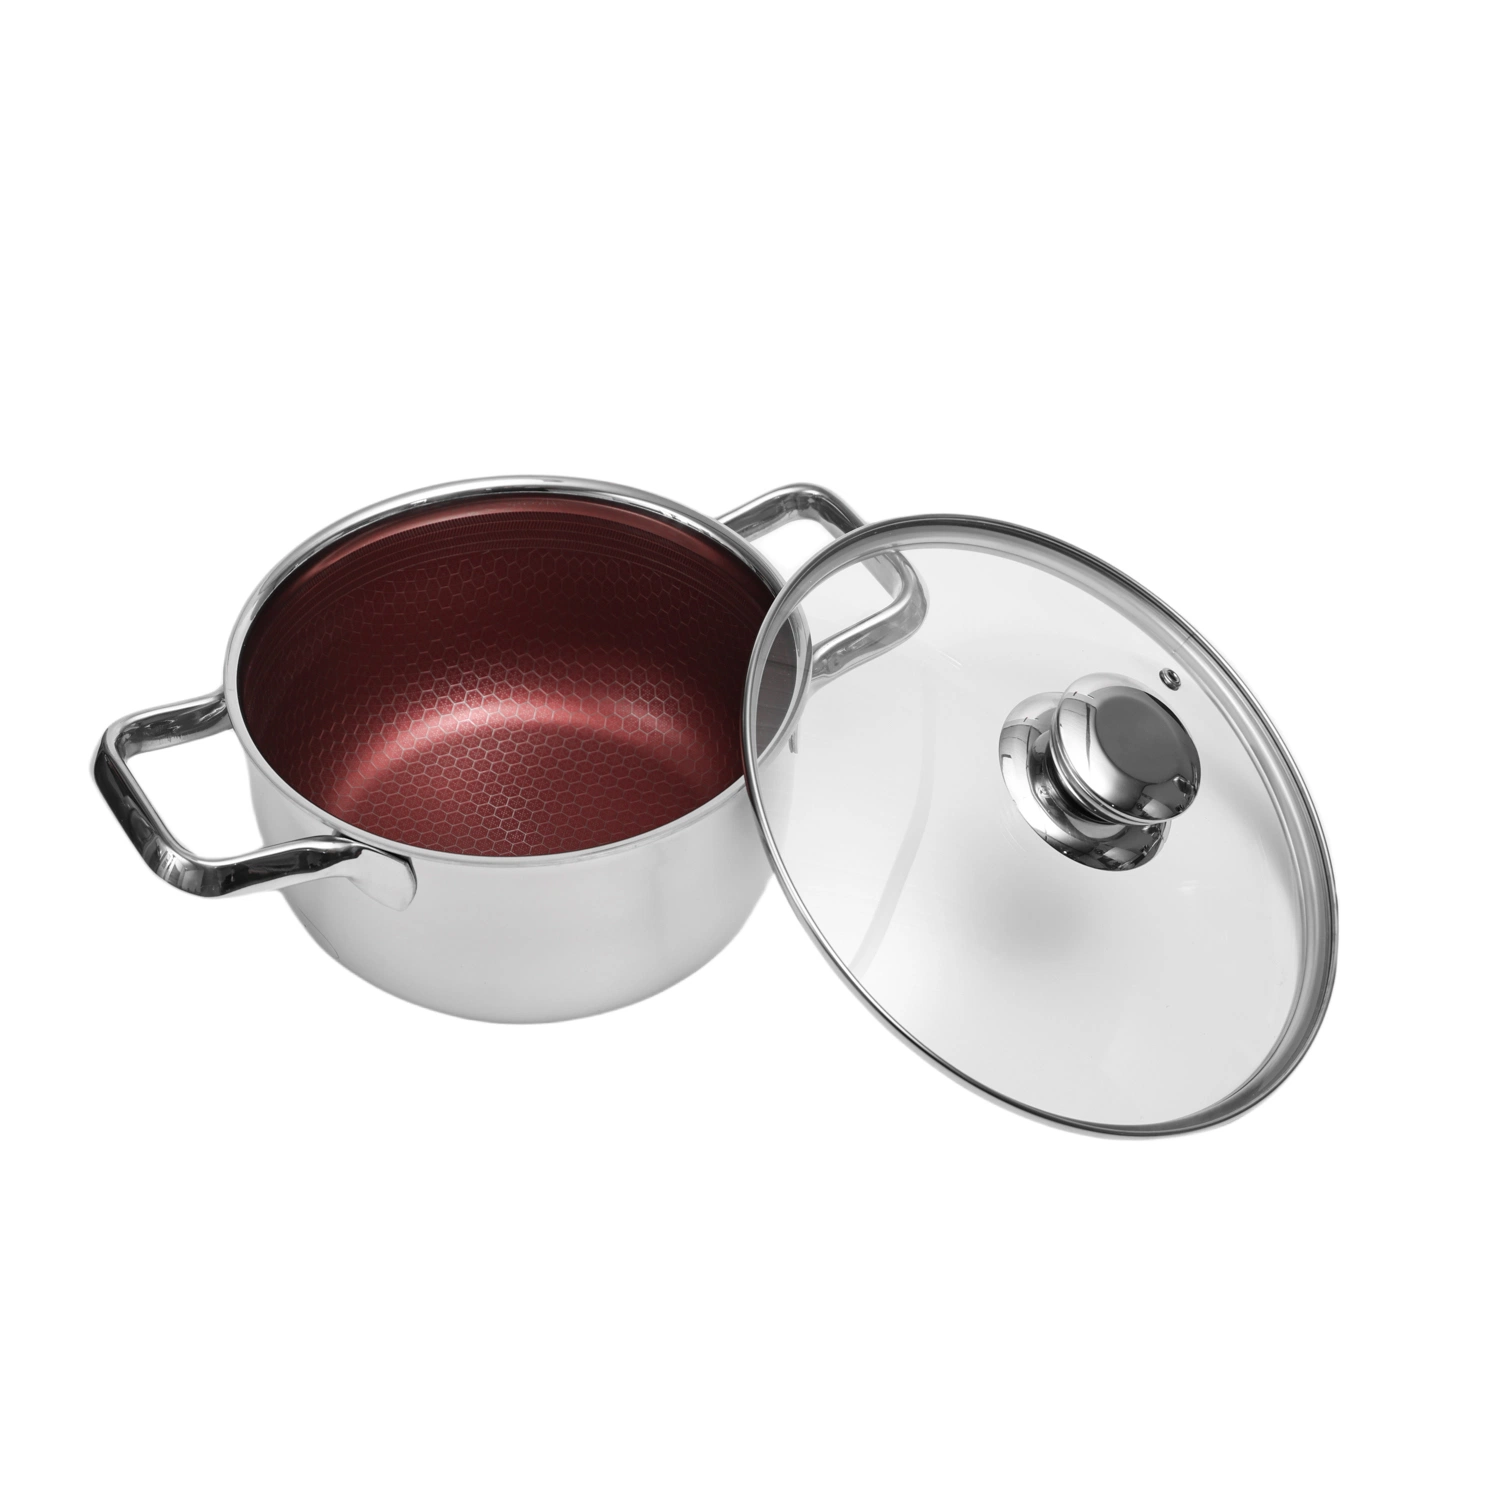 Hot Sales Stainless Steel Cookware Nonstick Honey Comb Red Coating 20cm Soup Pot